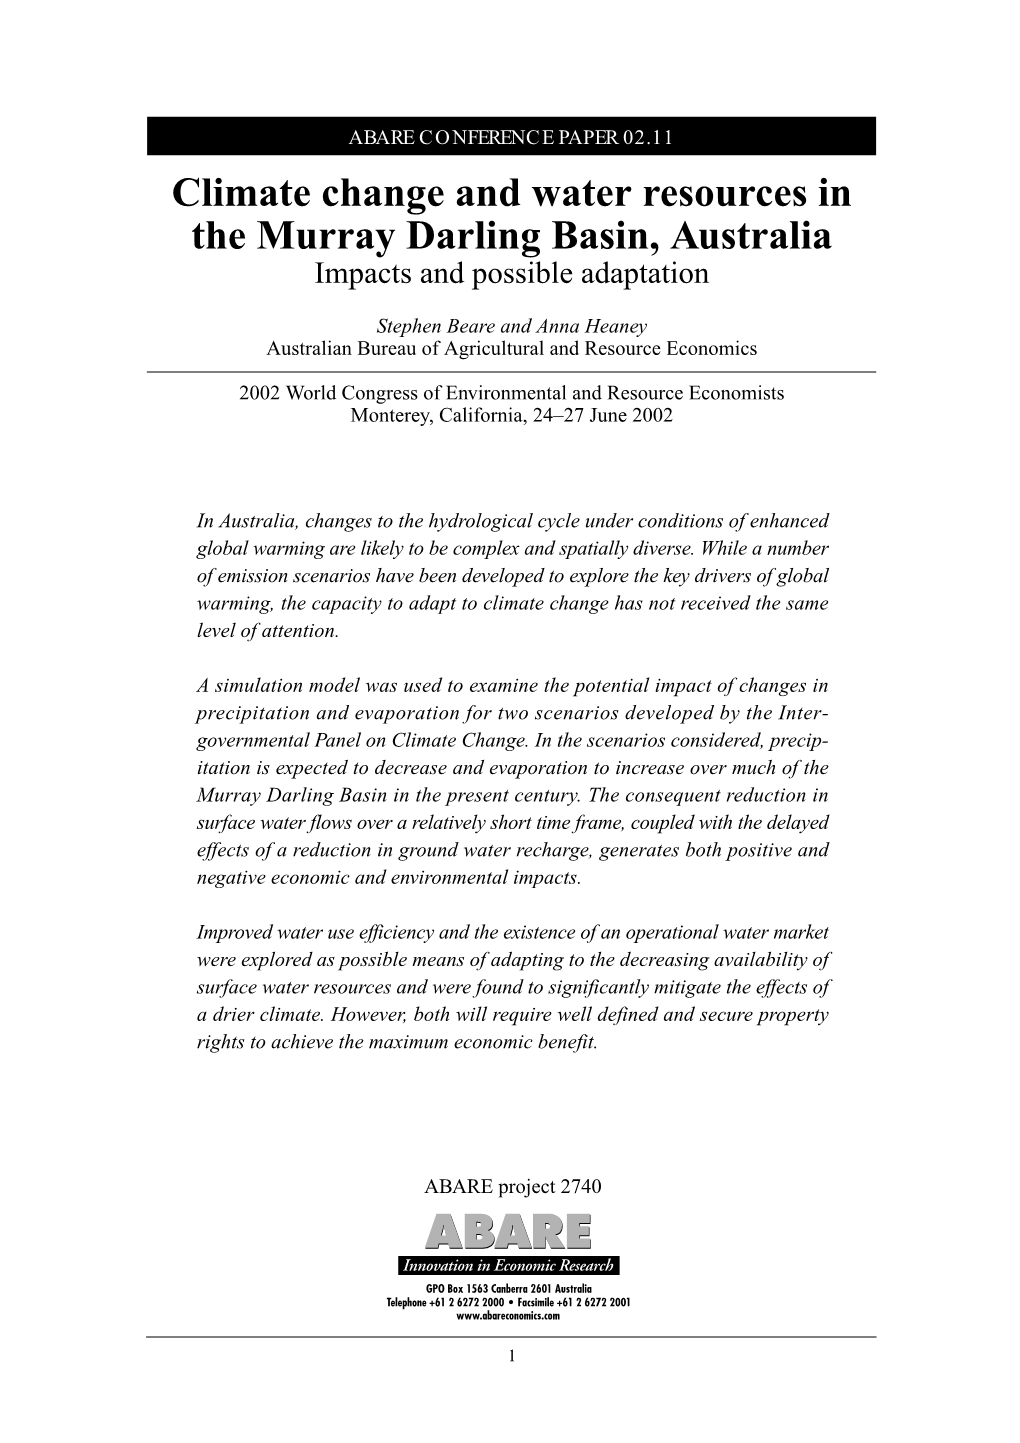 Climate Change and Water Resources in the Murray Darling Basin, Australia Impacts and Possible Adaptation